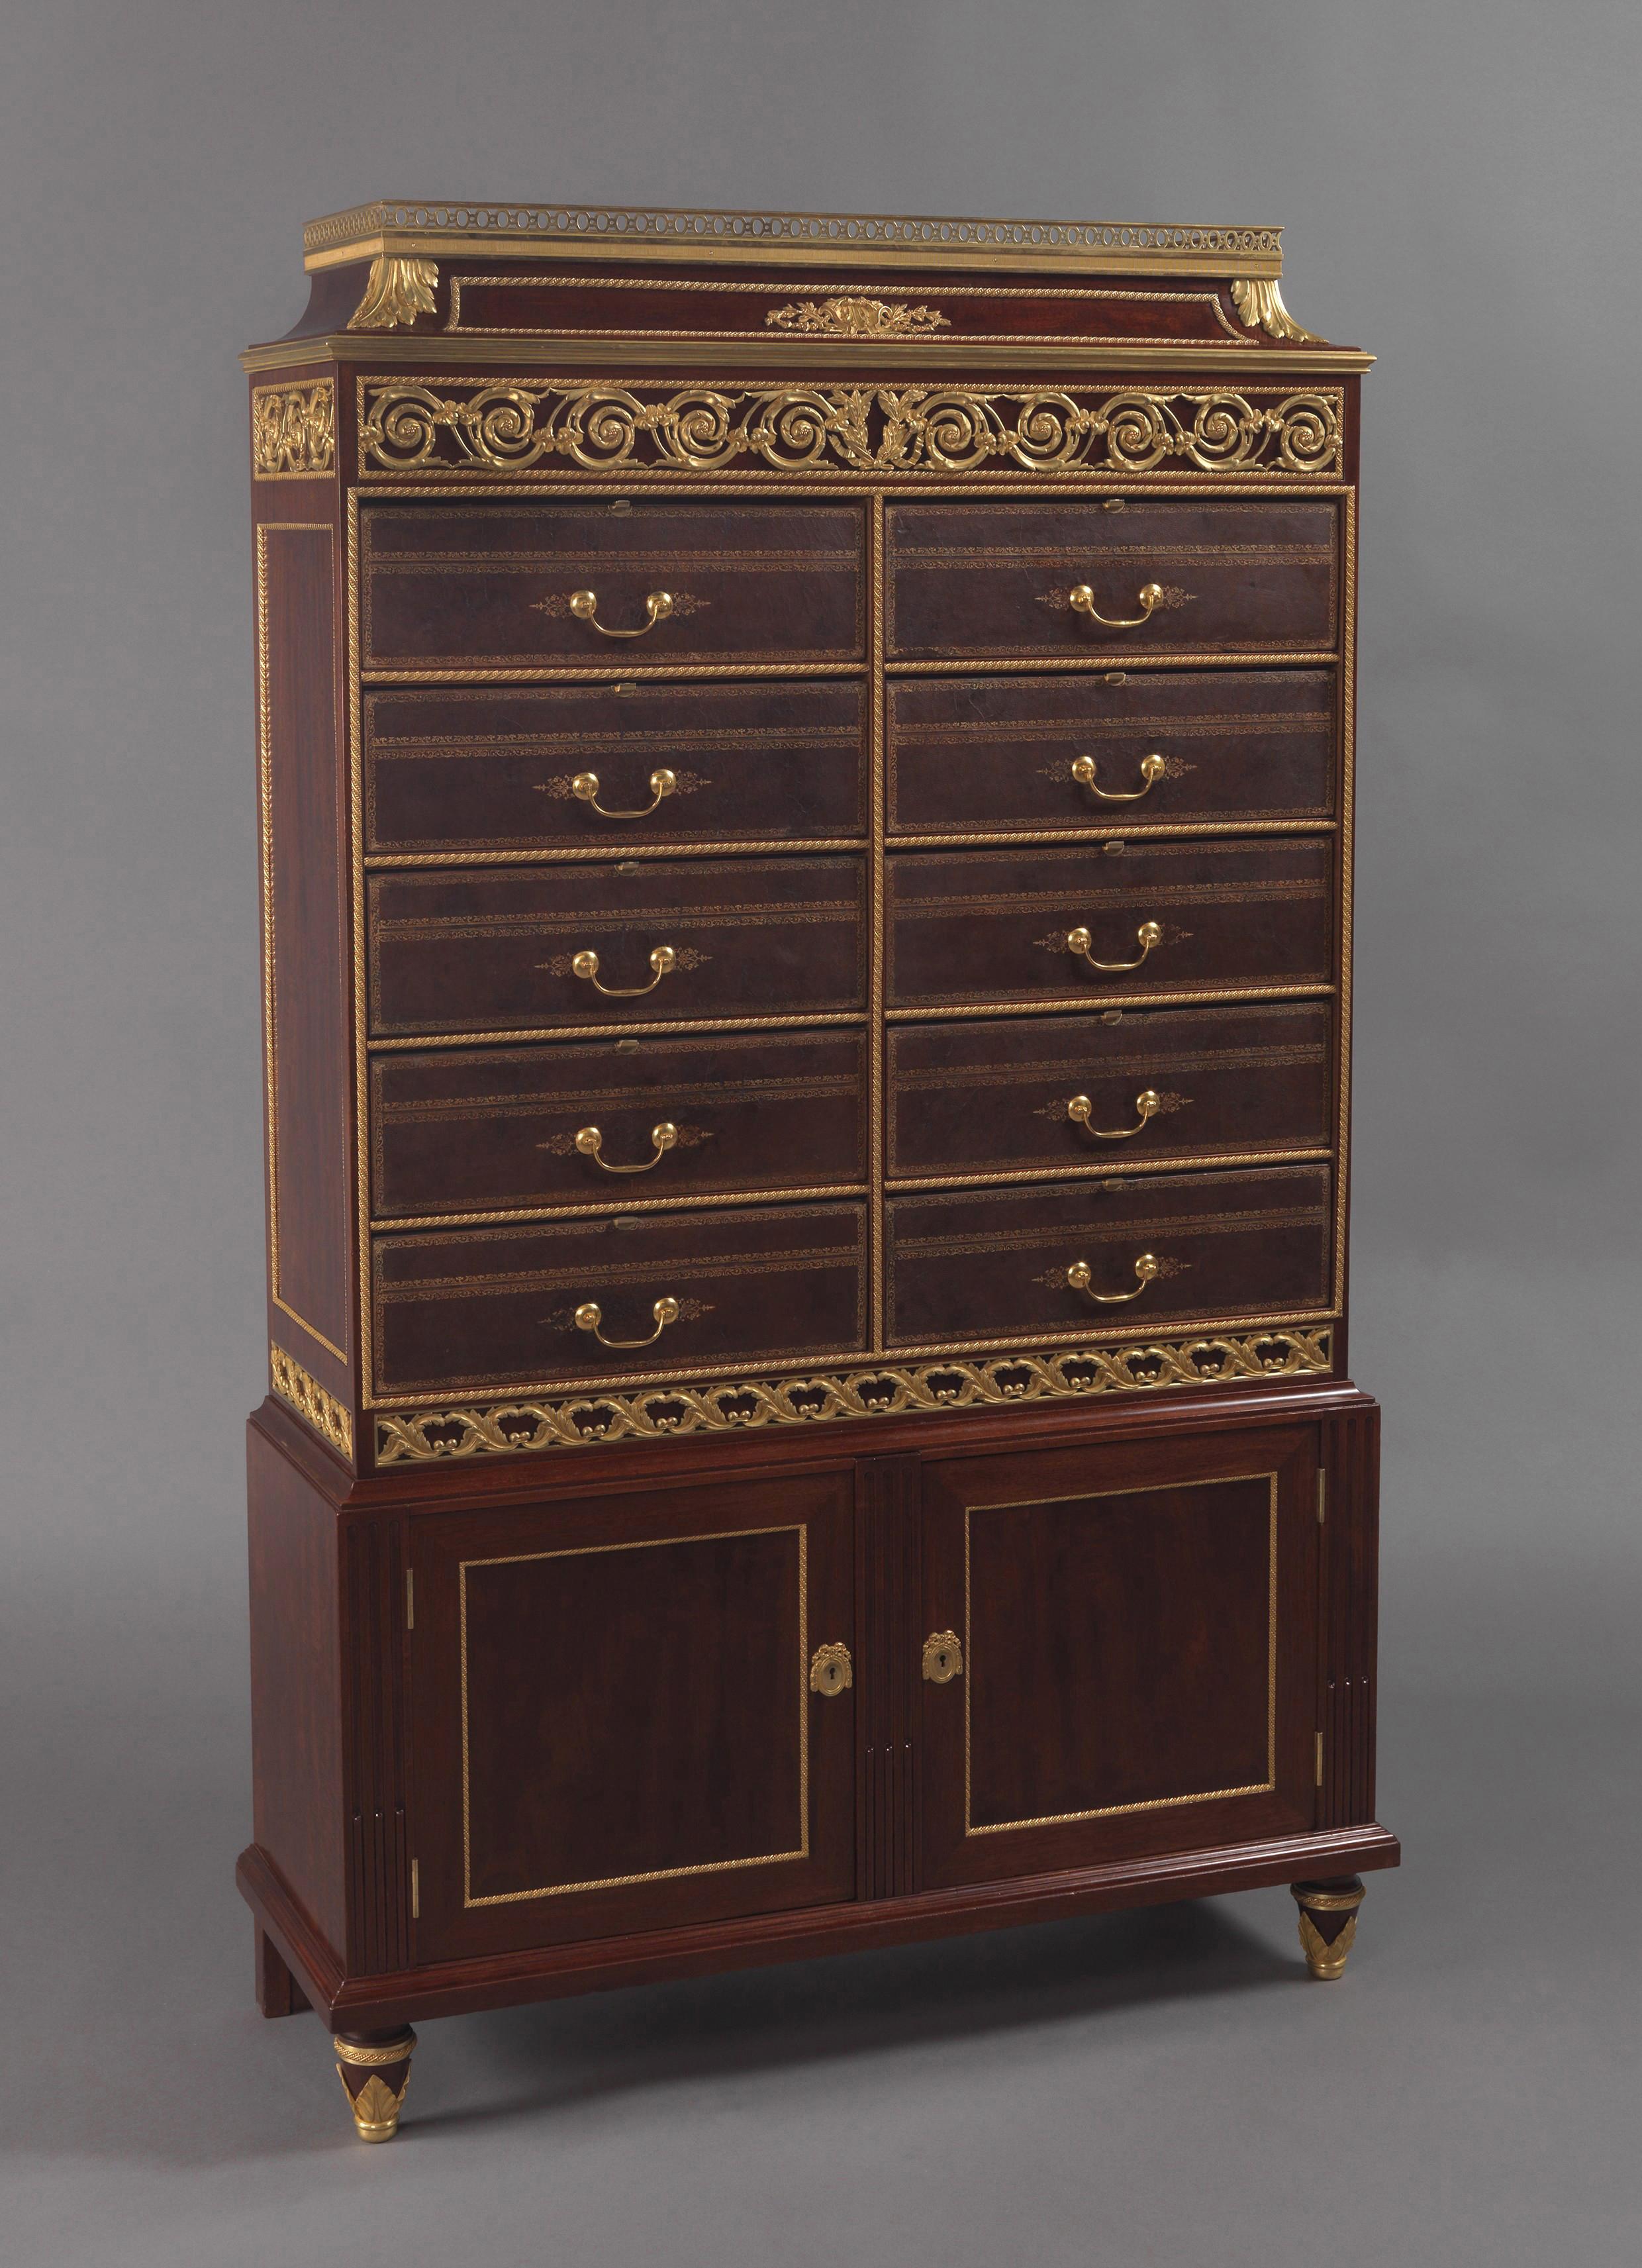 A rare gilt-bronze mounted mahogany Folio document cabinet by François Linke, with a unique locking system by Clément Linke.

French, circa 1900. 

Linke Index No: 2561.
Signed 'F. Linke' to front right side of the gallery. 
Stamped to the